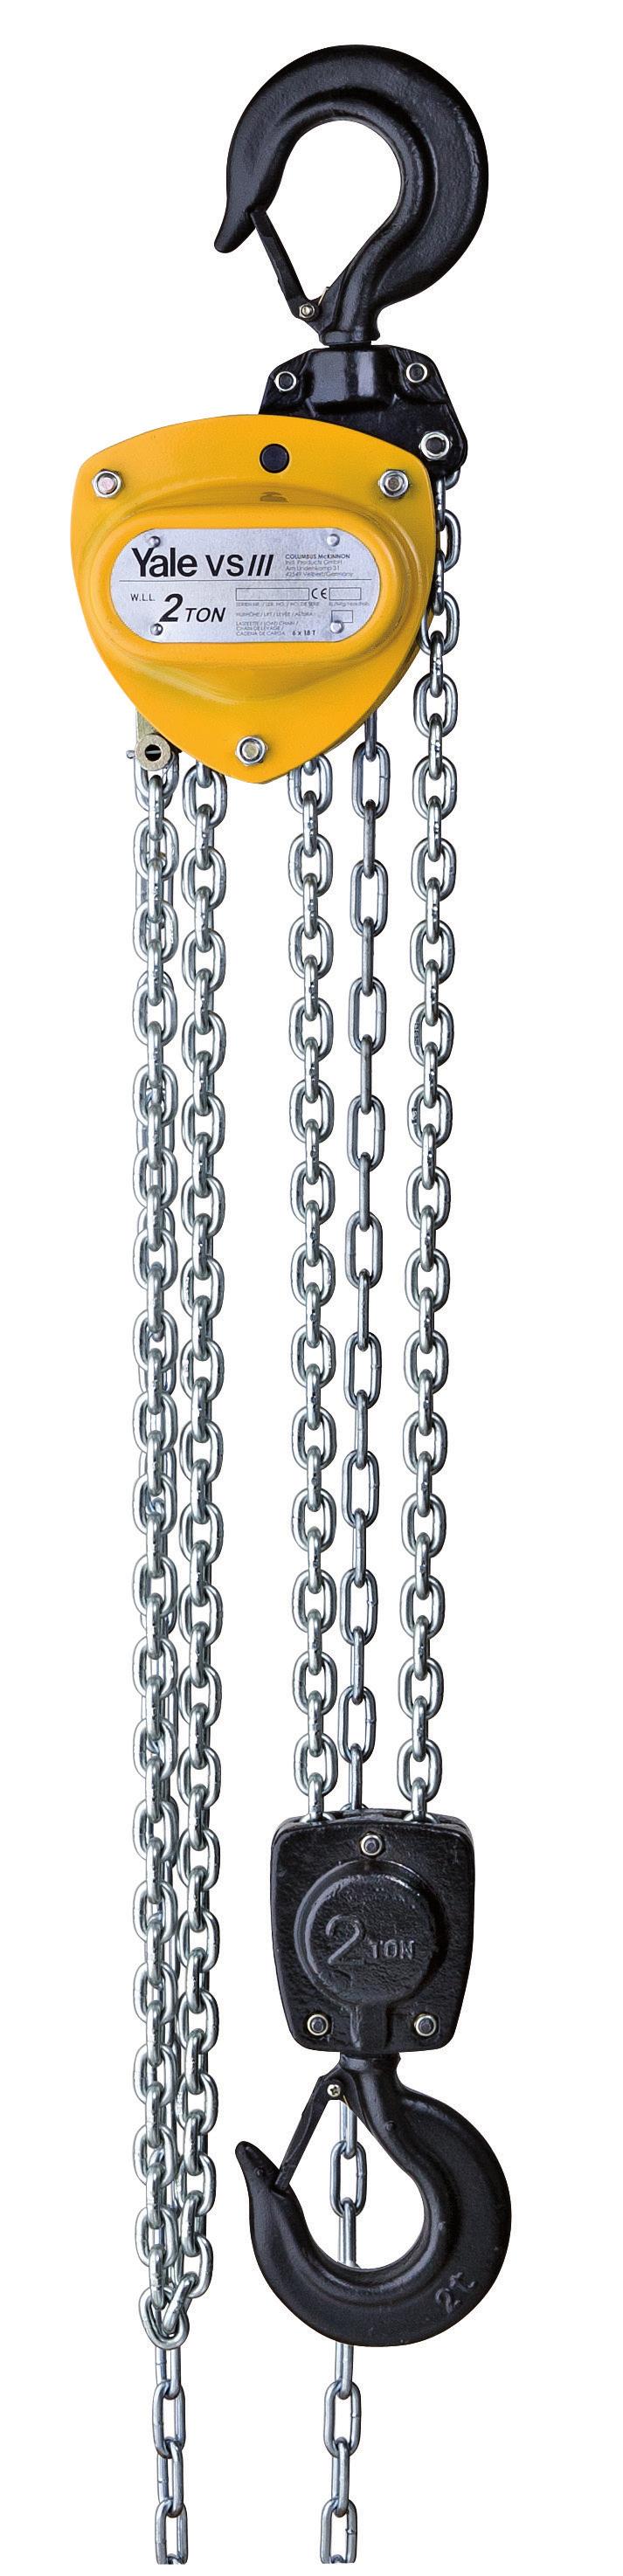 The improved hand chain guide prevents canting or jamming of the hand chain, leading to a smooth running of